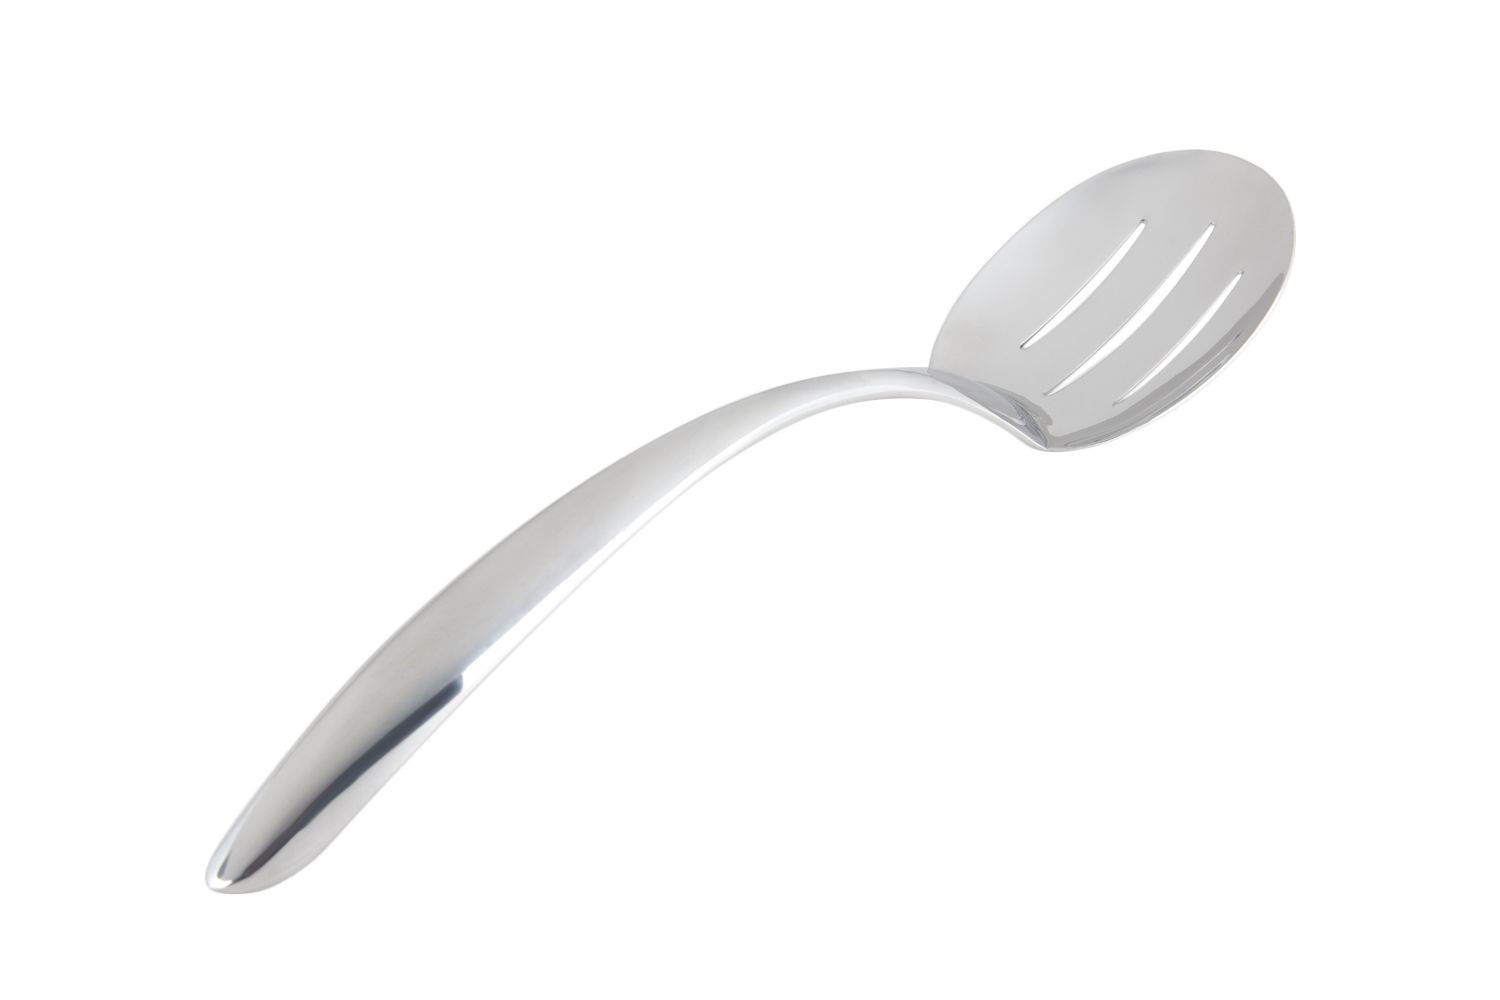 Bon Chef 9458 EZ Use Banquet Serving Slotted Spoon with Hollow Cool Handle, 13 1/2"